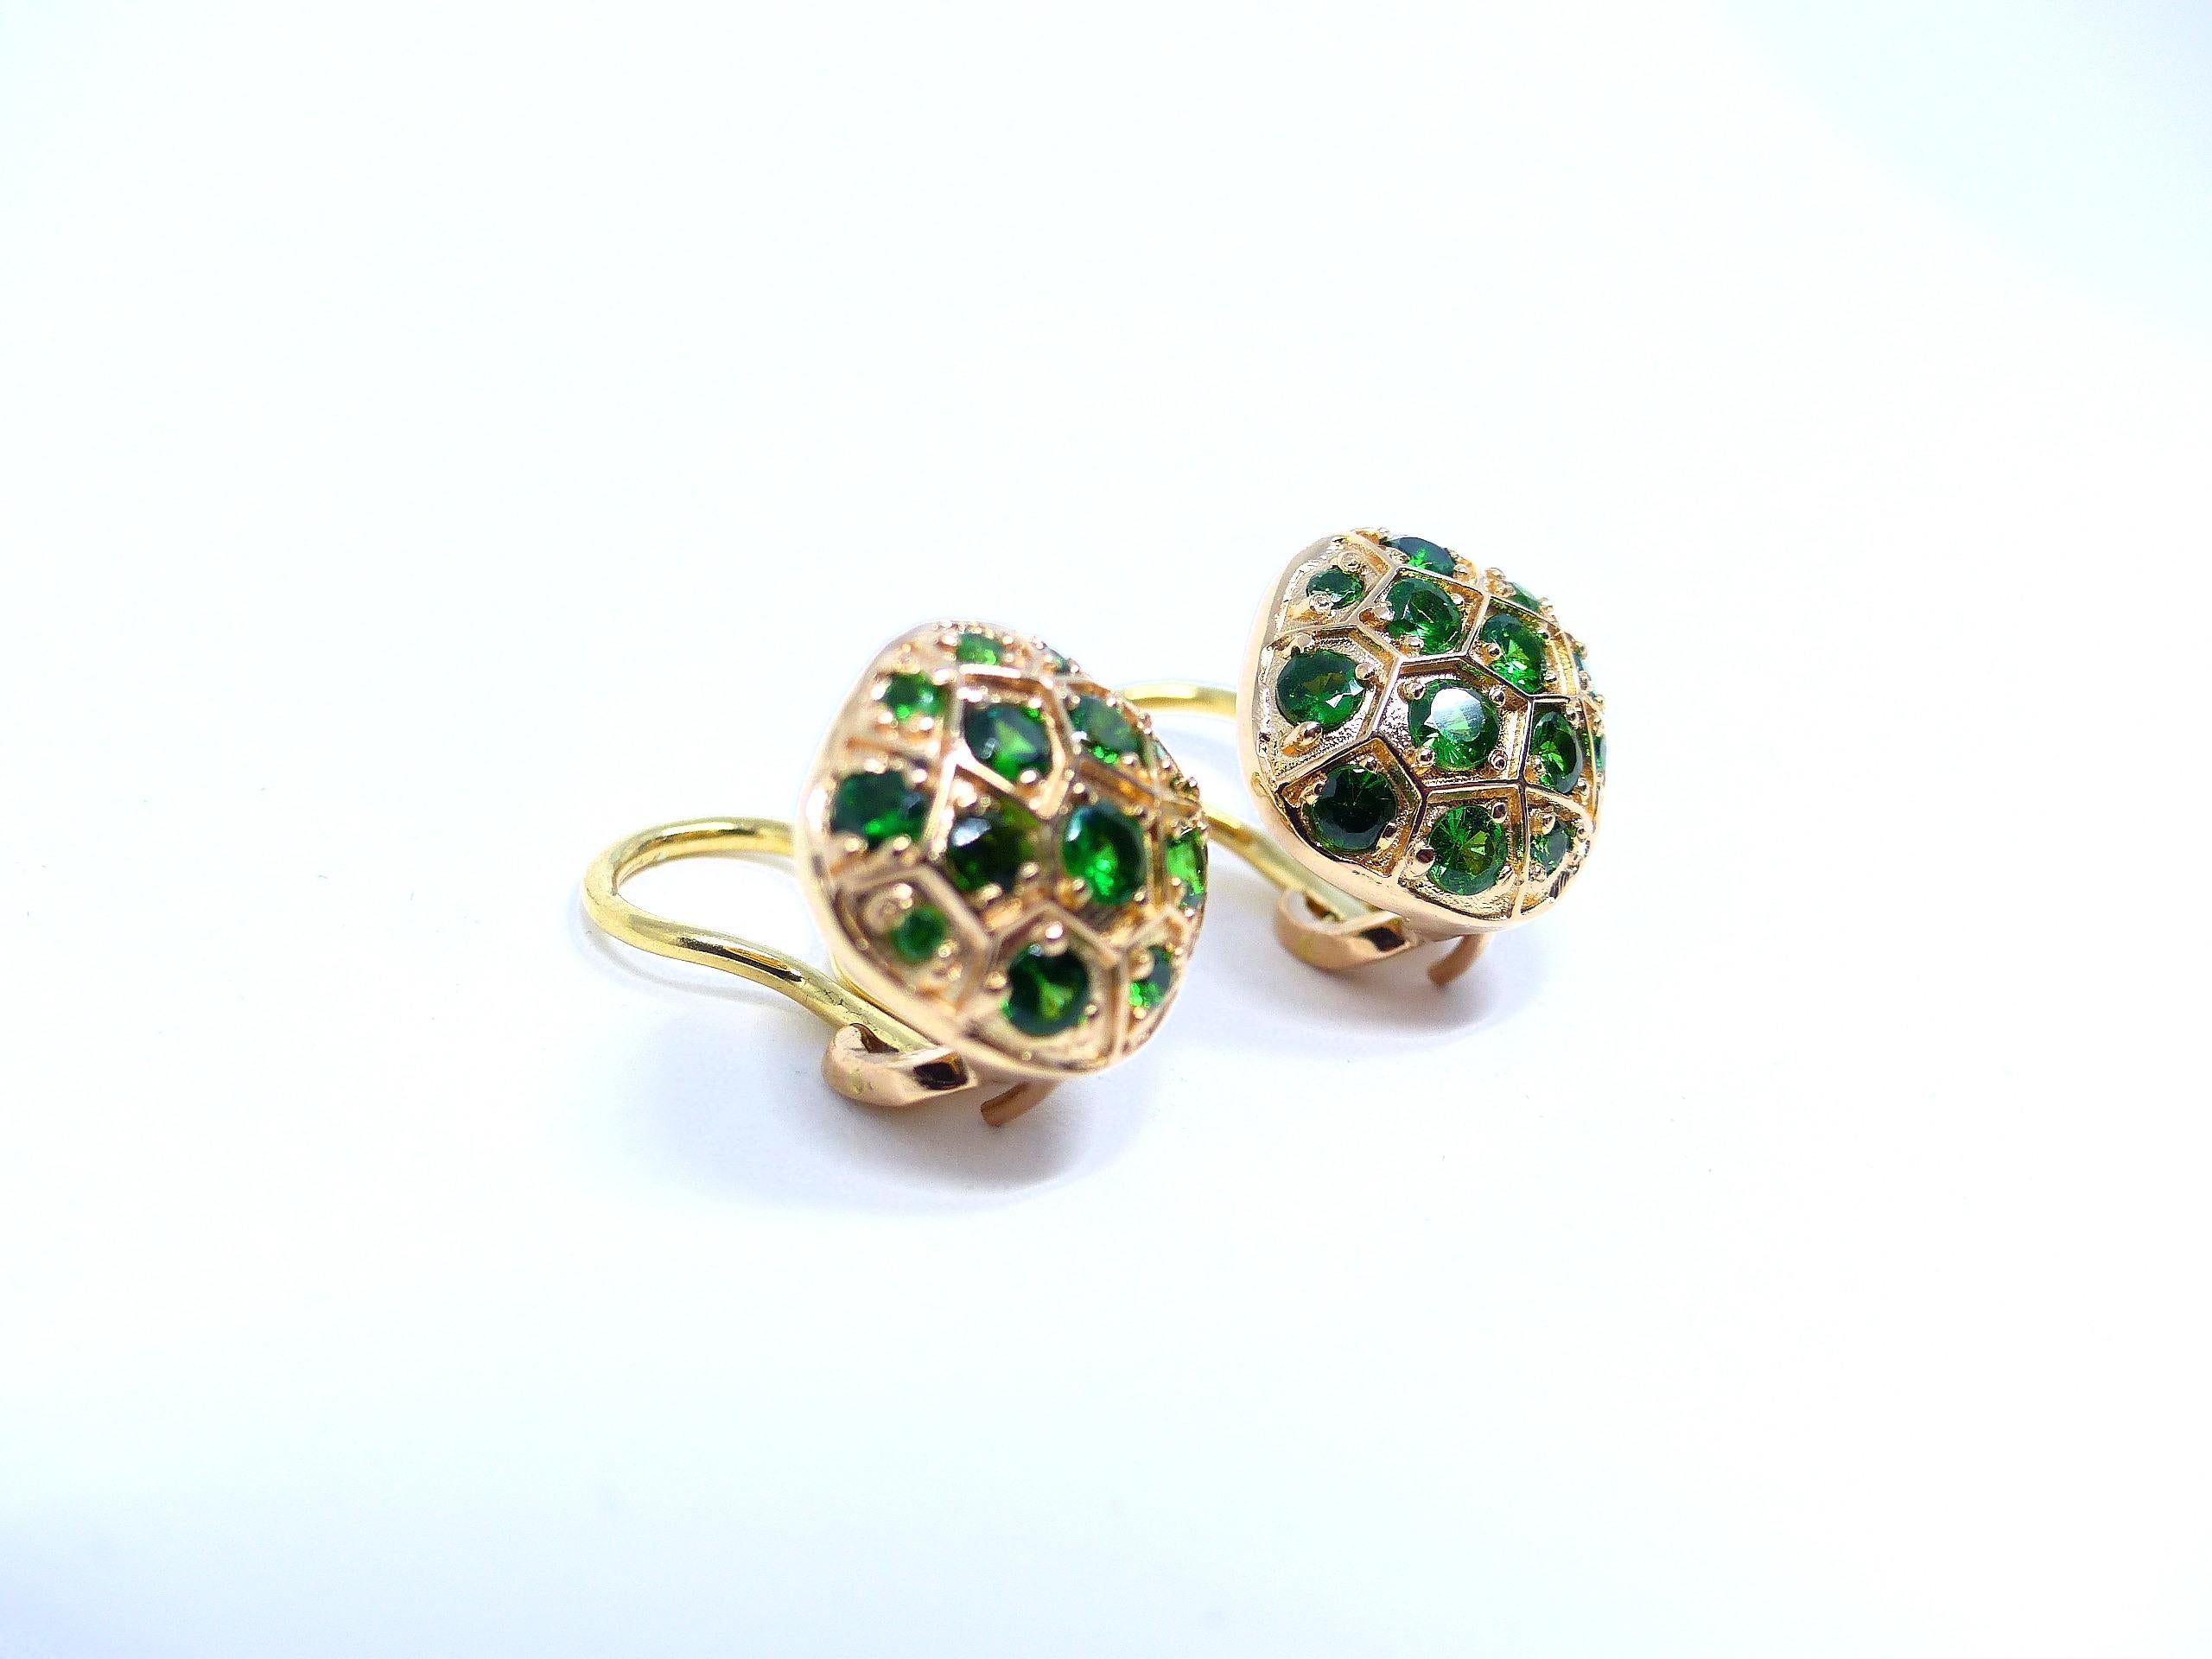 Thomas Leyser is renowned for his contemporary jewellery designs utilizing fine gemstones.

These 18k red gold (8.50g) pair of earrings are set with 26x fine Tsavorites in with intensiv green colour (round, 1.4-3mm, 1.56ct).

These gems are renowned